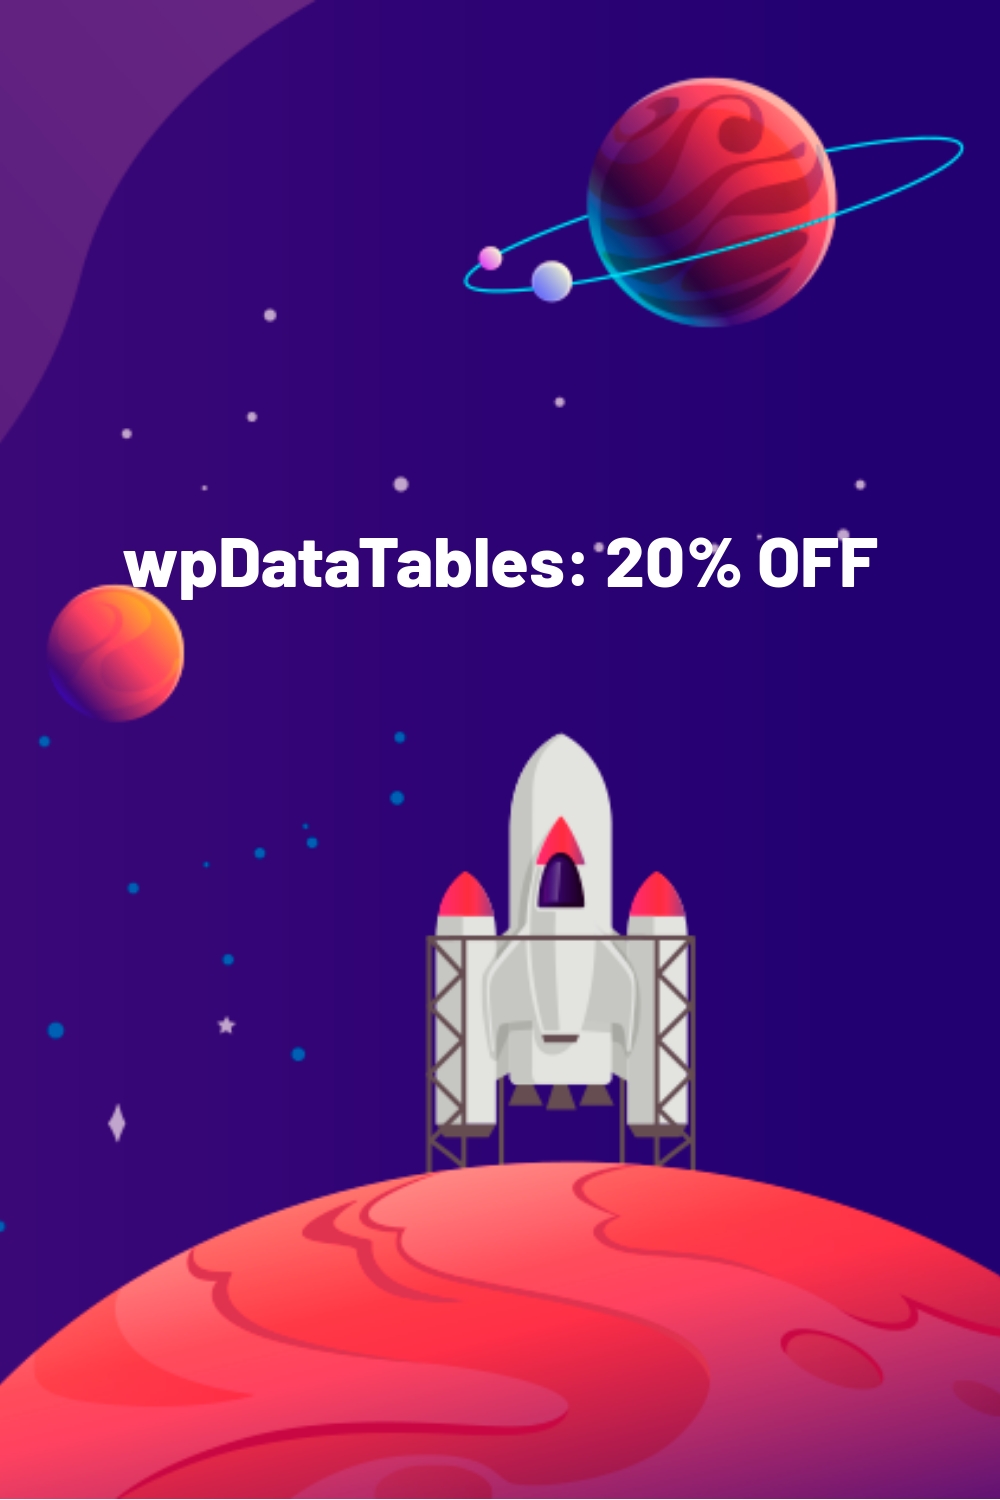 wpDataTables: 20% OFF